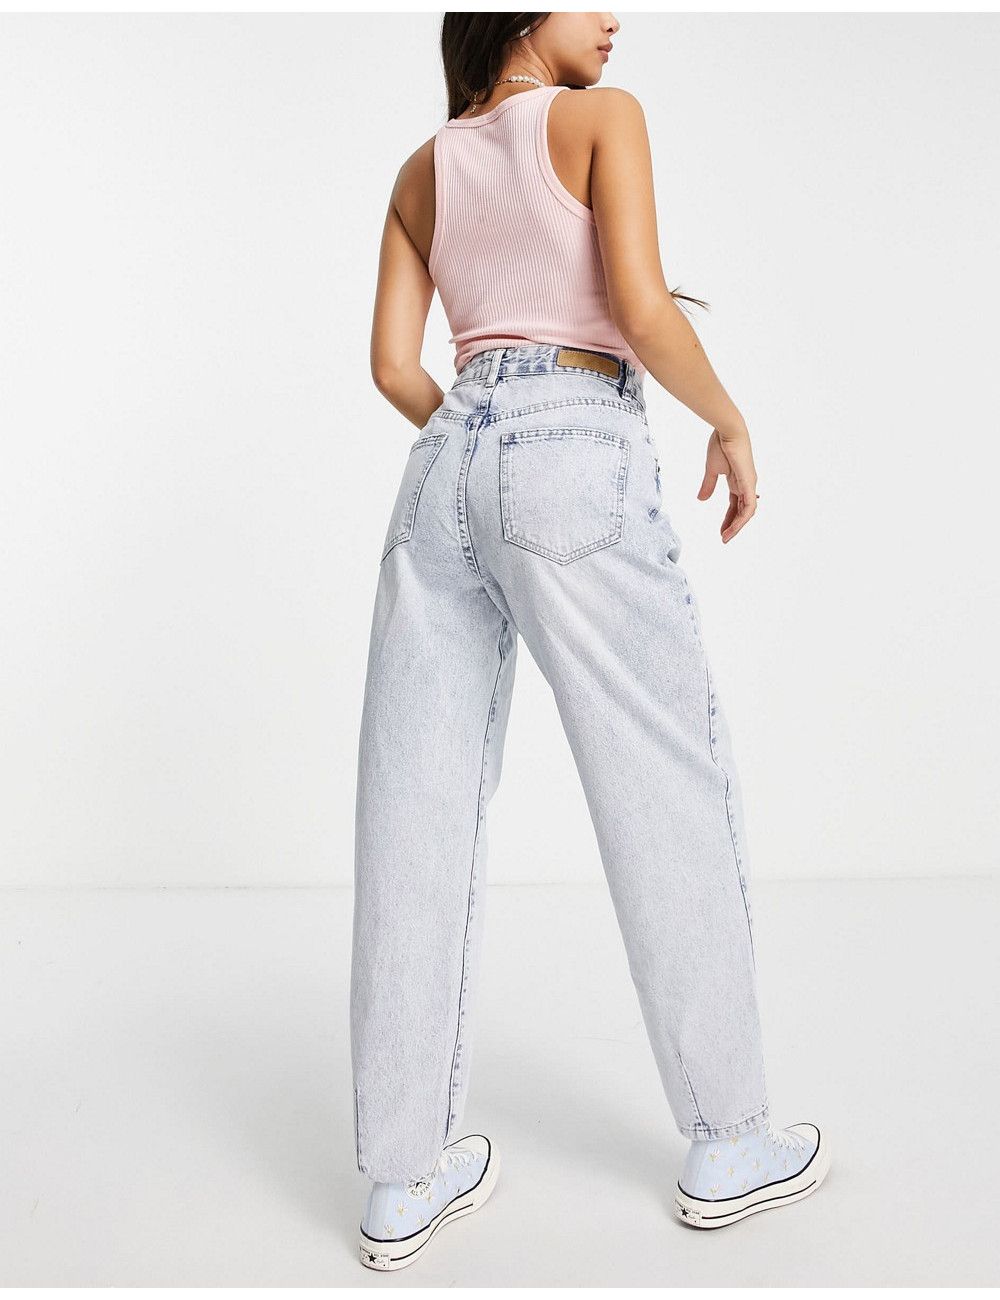 Cotton:On slouchy mom jeans...